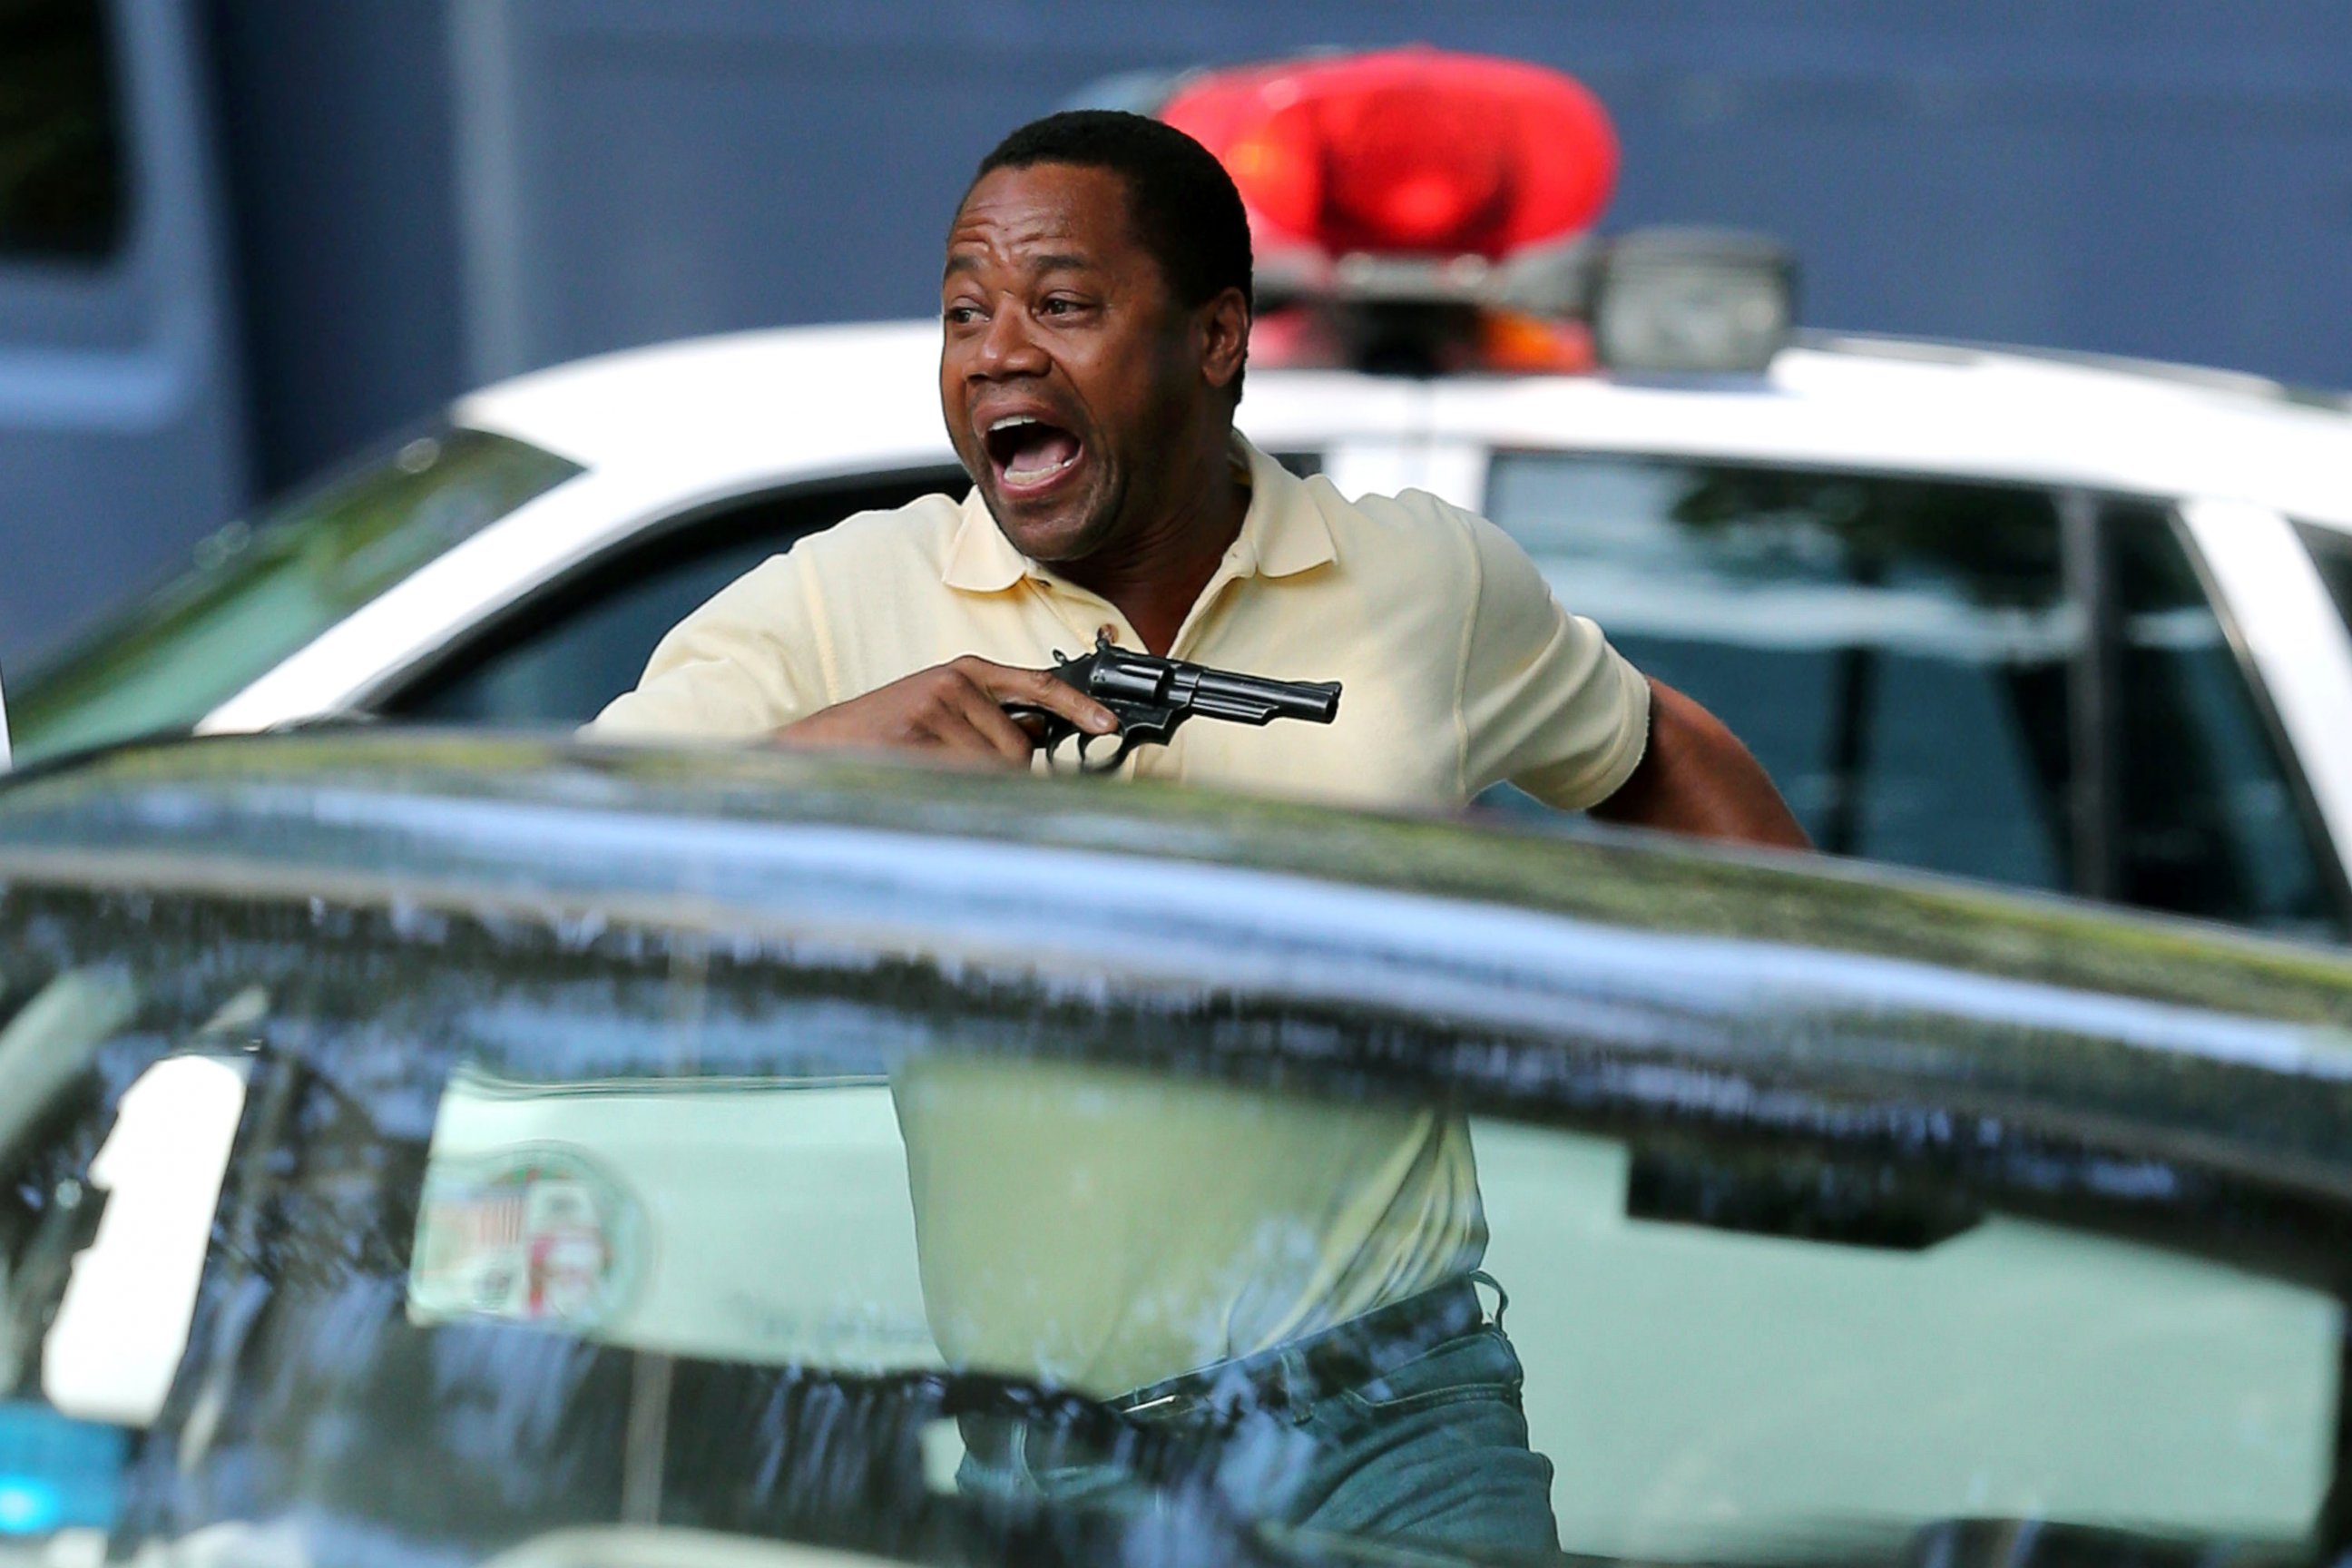 PHOTO: Cuba Gooding jr. brandishes a pistol in his underpants on the set of the upcoming drama 'American Crime Story: The People Vs OJ Simpson.